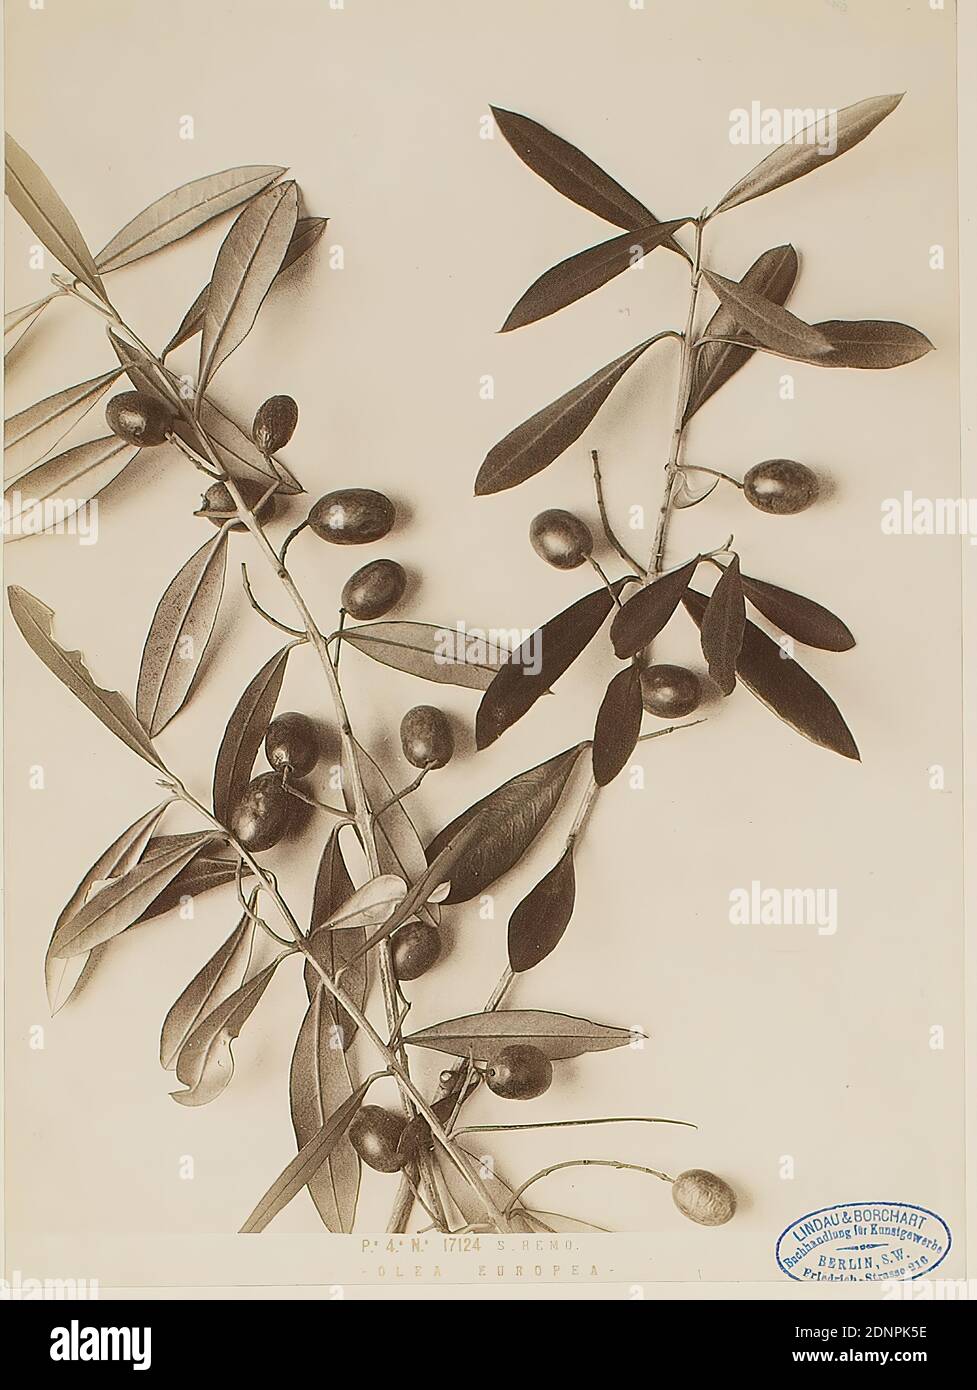 Remo - Olea Europea, albumin paper, black and white positive process, image size: height: 26.00 cm; width: 19.20 cm, REMO - OLEA EUROPEA -. Recto and right on the picture Stempel Lindau & Borchart - Buchhandlung für Kunstgewerbe, Berlin S.W, Friedrich-Strasse 216, photography, trees, bushes Banque D'Images